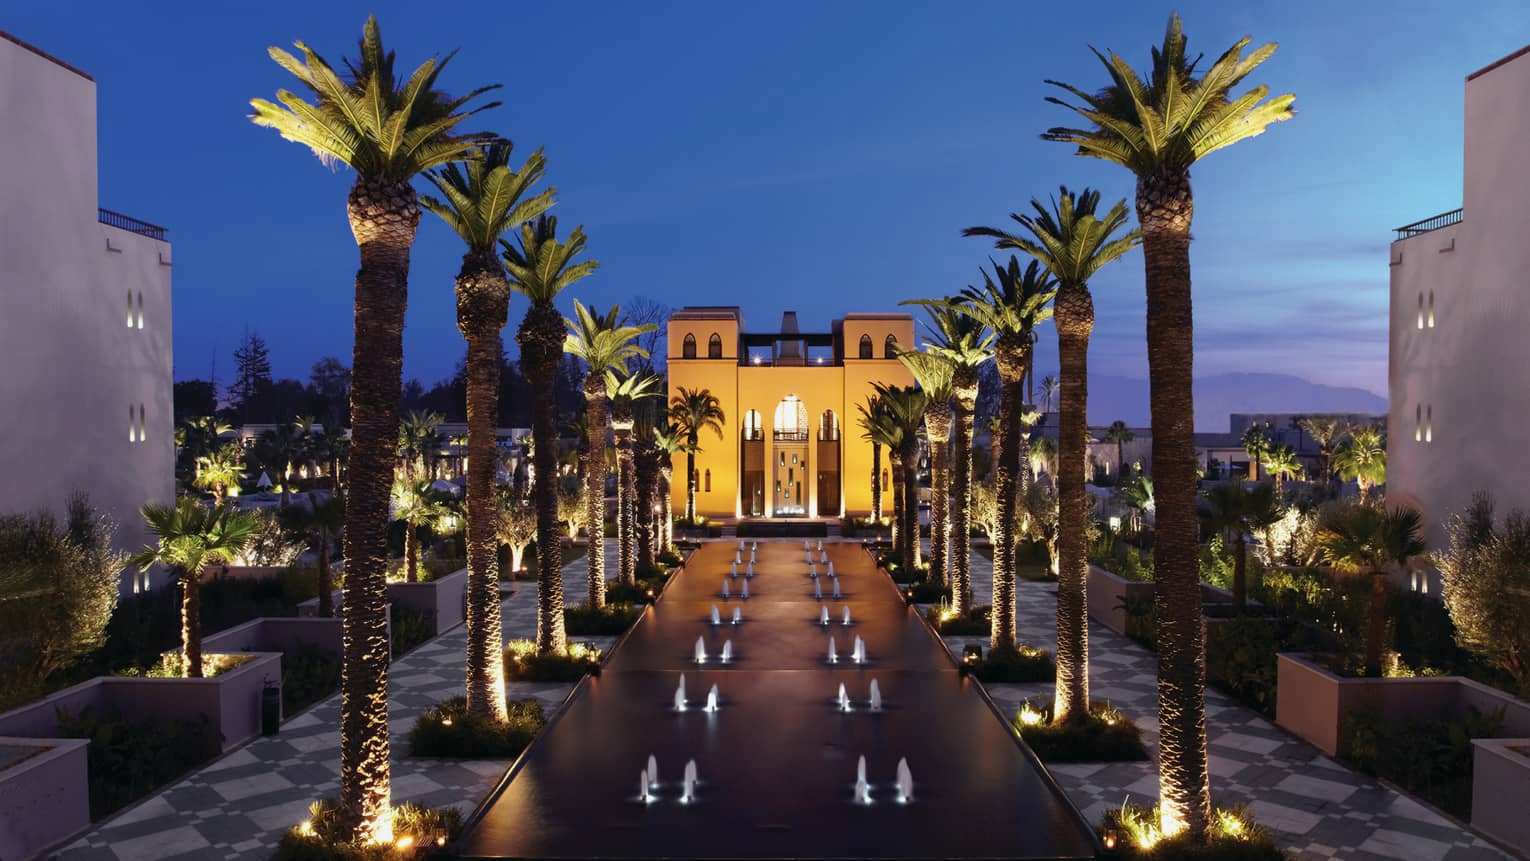 14 days Morocco luxury tour from Casablanca to discover the luxury Morocco